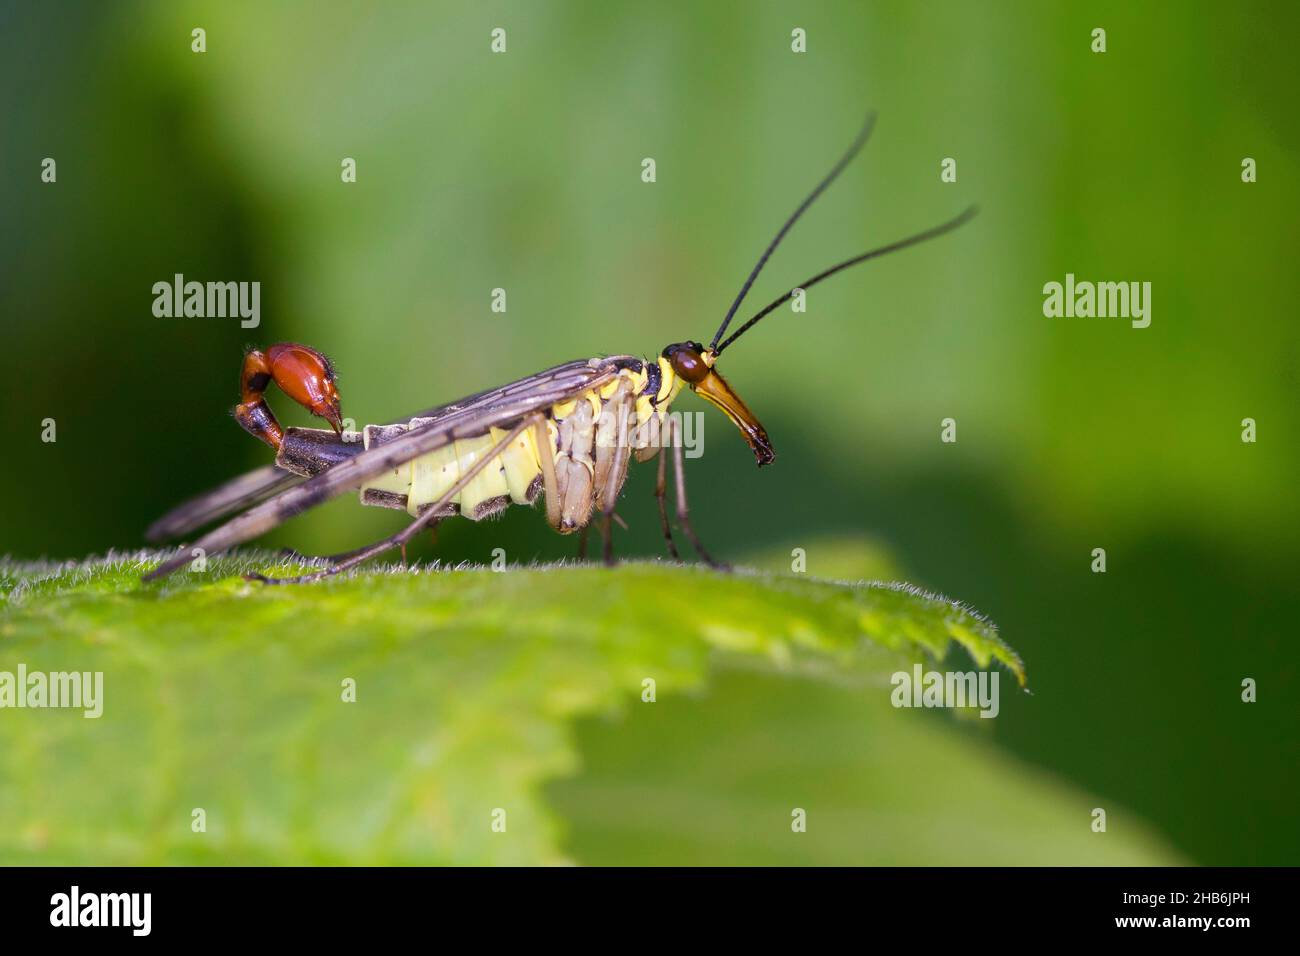 common scorpionfly (Panorpa cf. communis), Male with scorpion-like tail, Germany Stock Photo